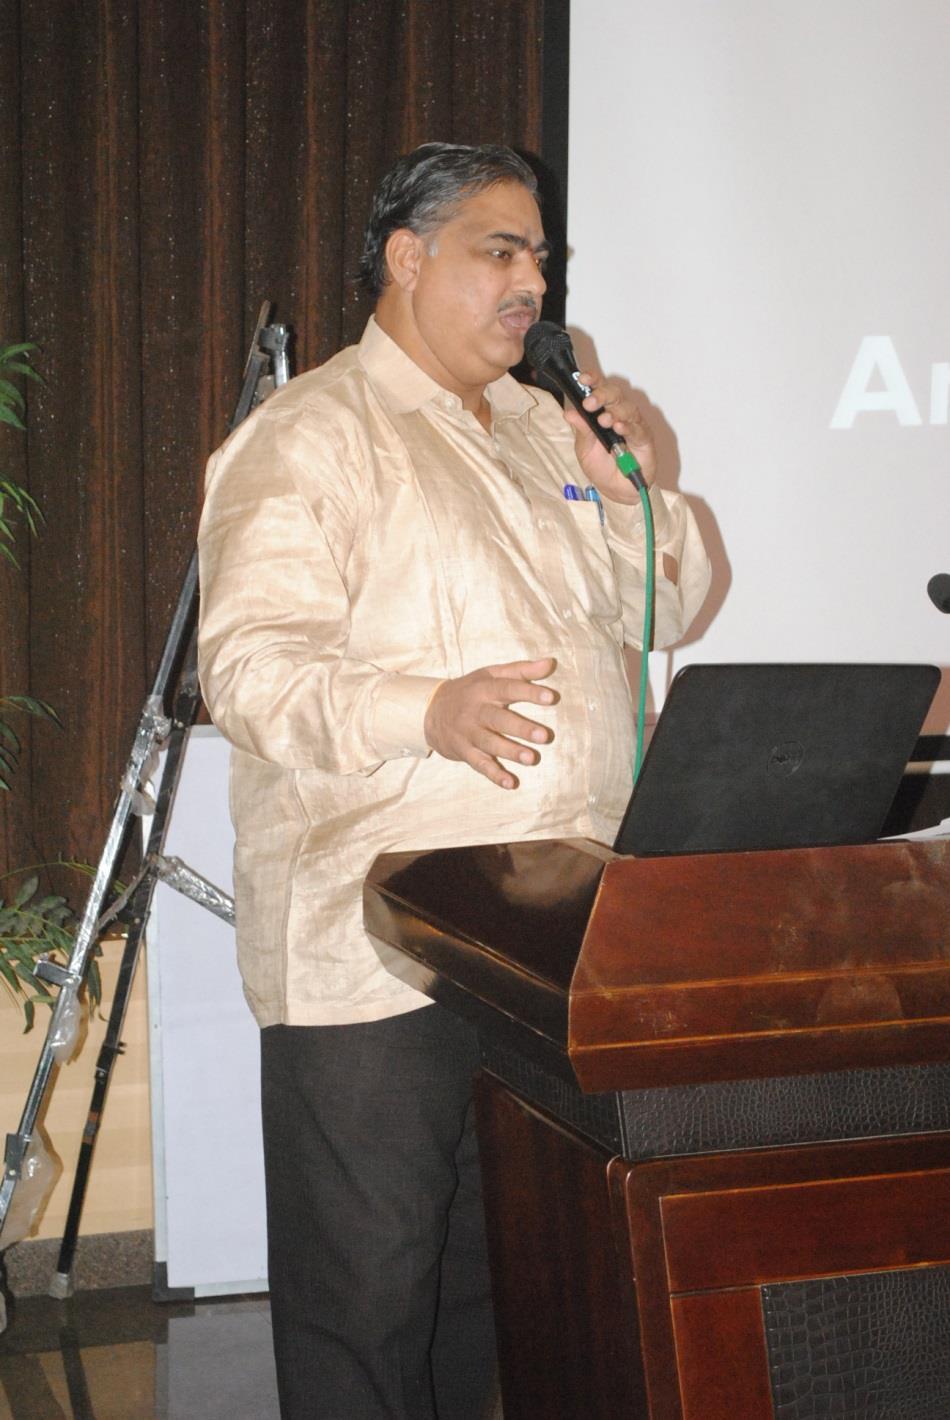 48 Session VIII: MLE in Indian States Presentation by Vinayak Reddy, SCERT Andhra Pradesh on Language Curriculum and